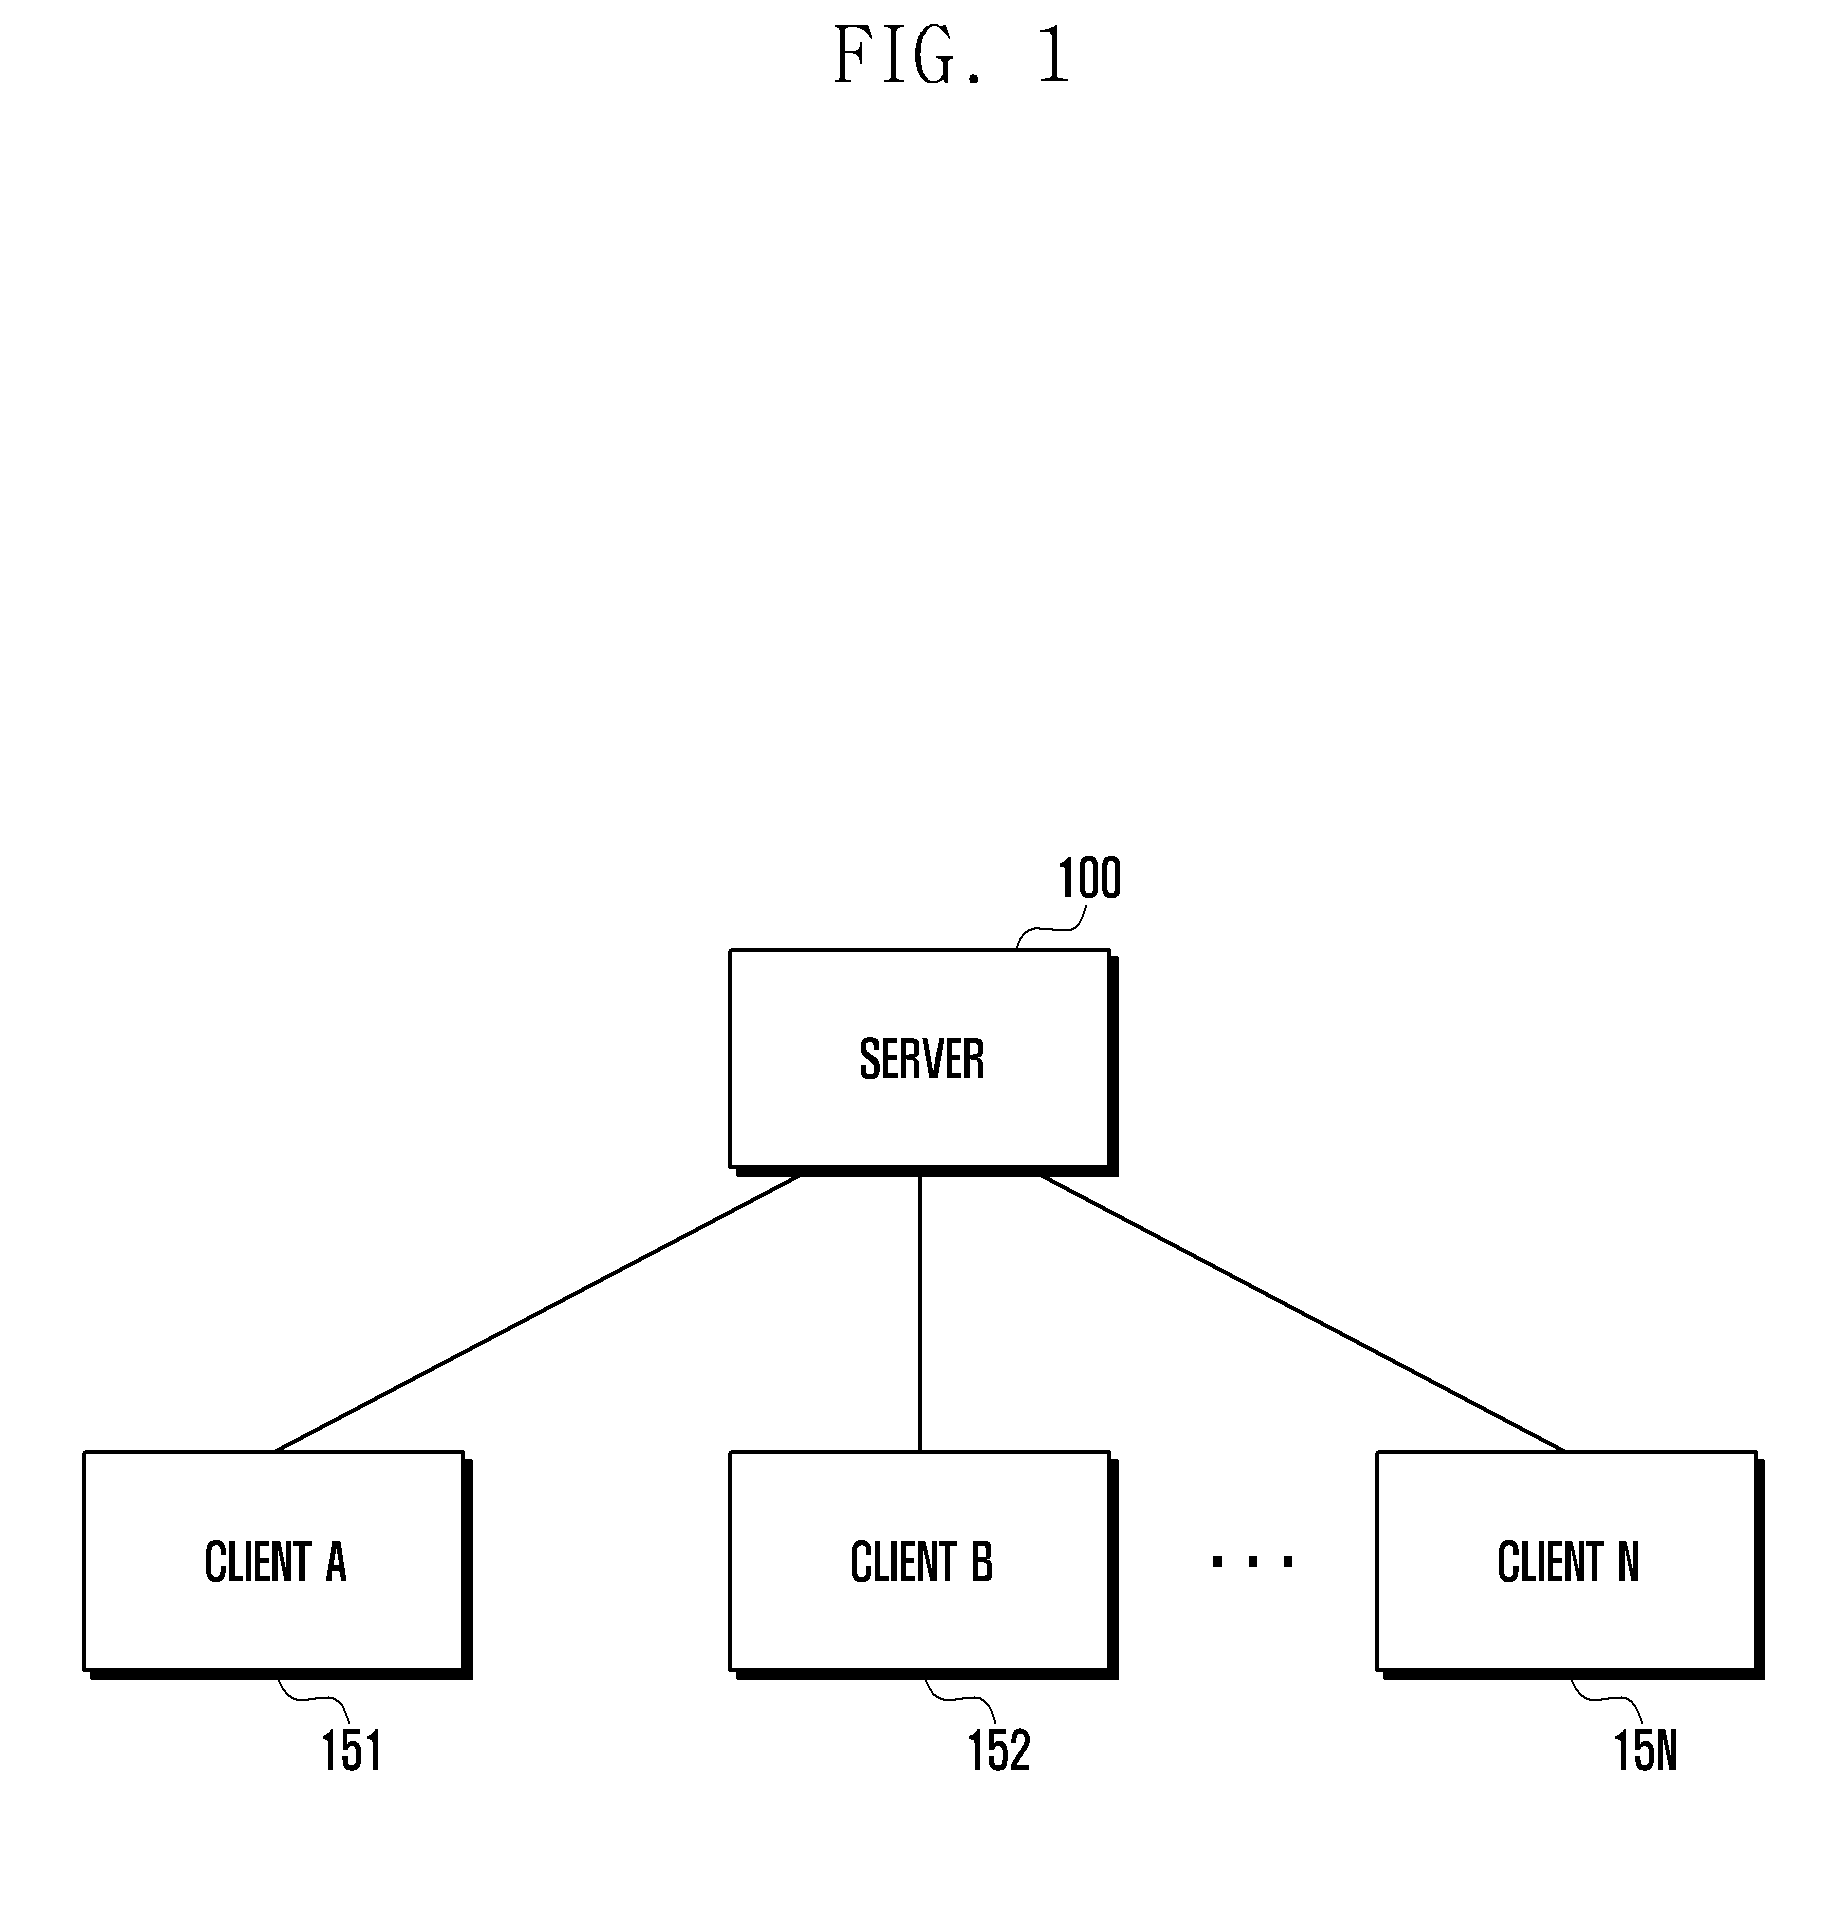 Content synchronization apparatus and method for cloud service system